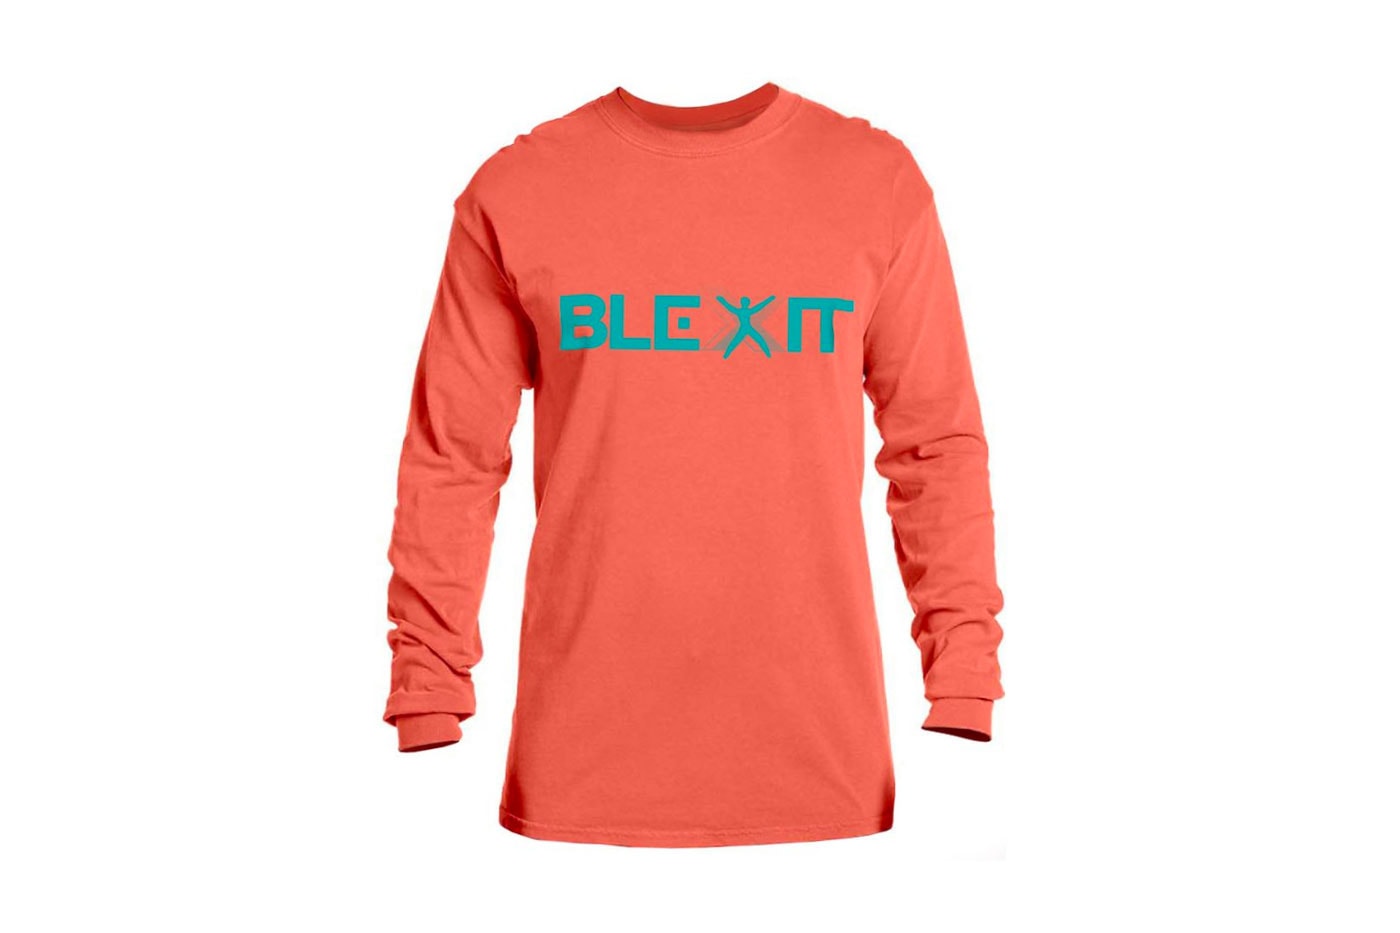 Kanye West Designs "Blexit" Merchandise black exit from democratic party candace owens republican controversial politics american usa president donald trump